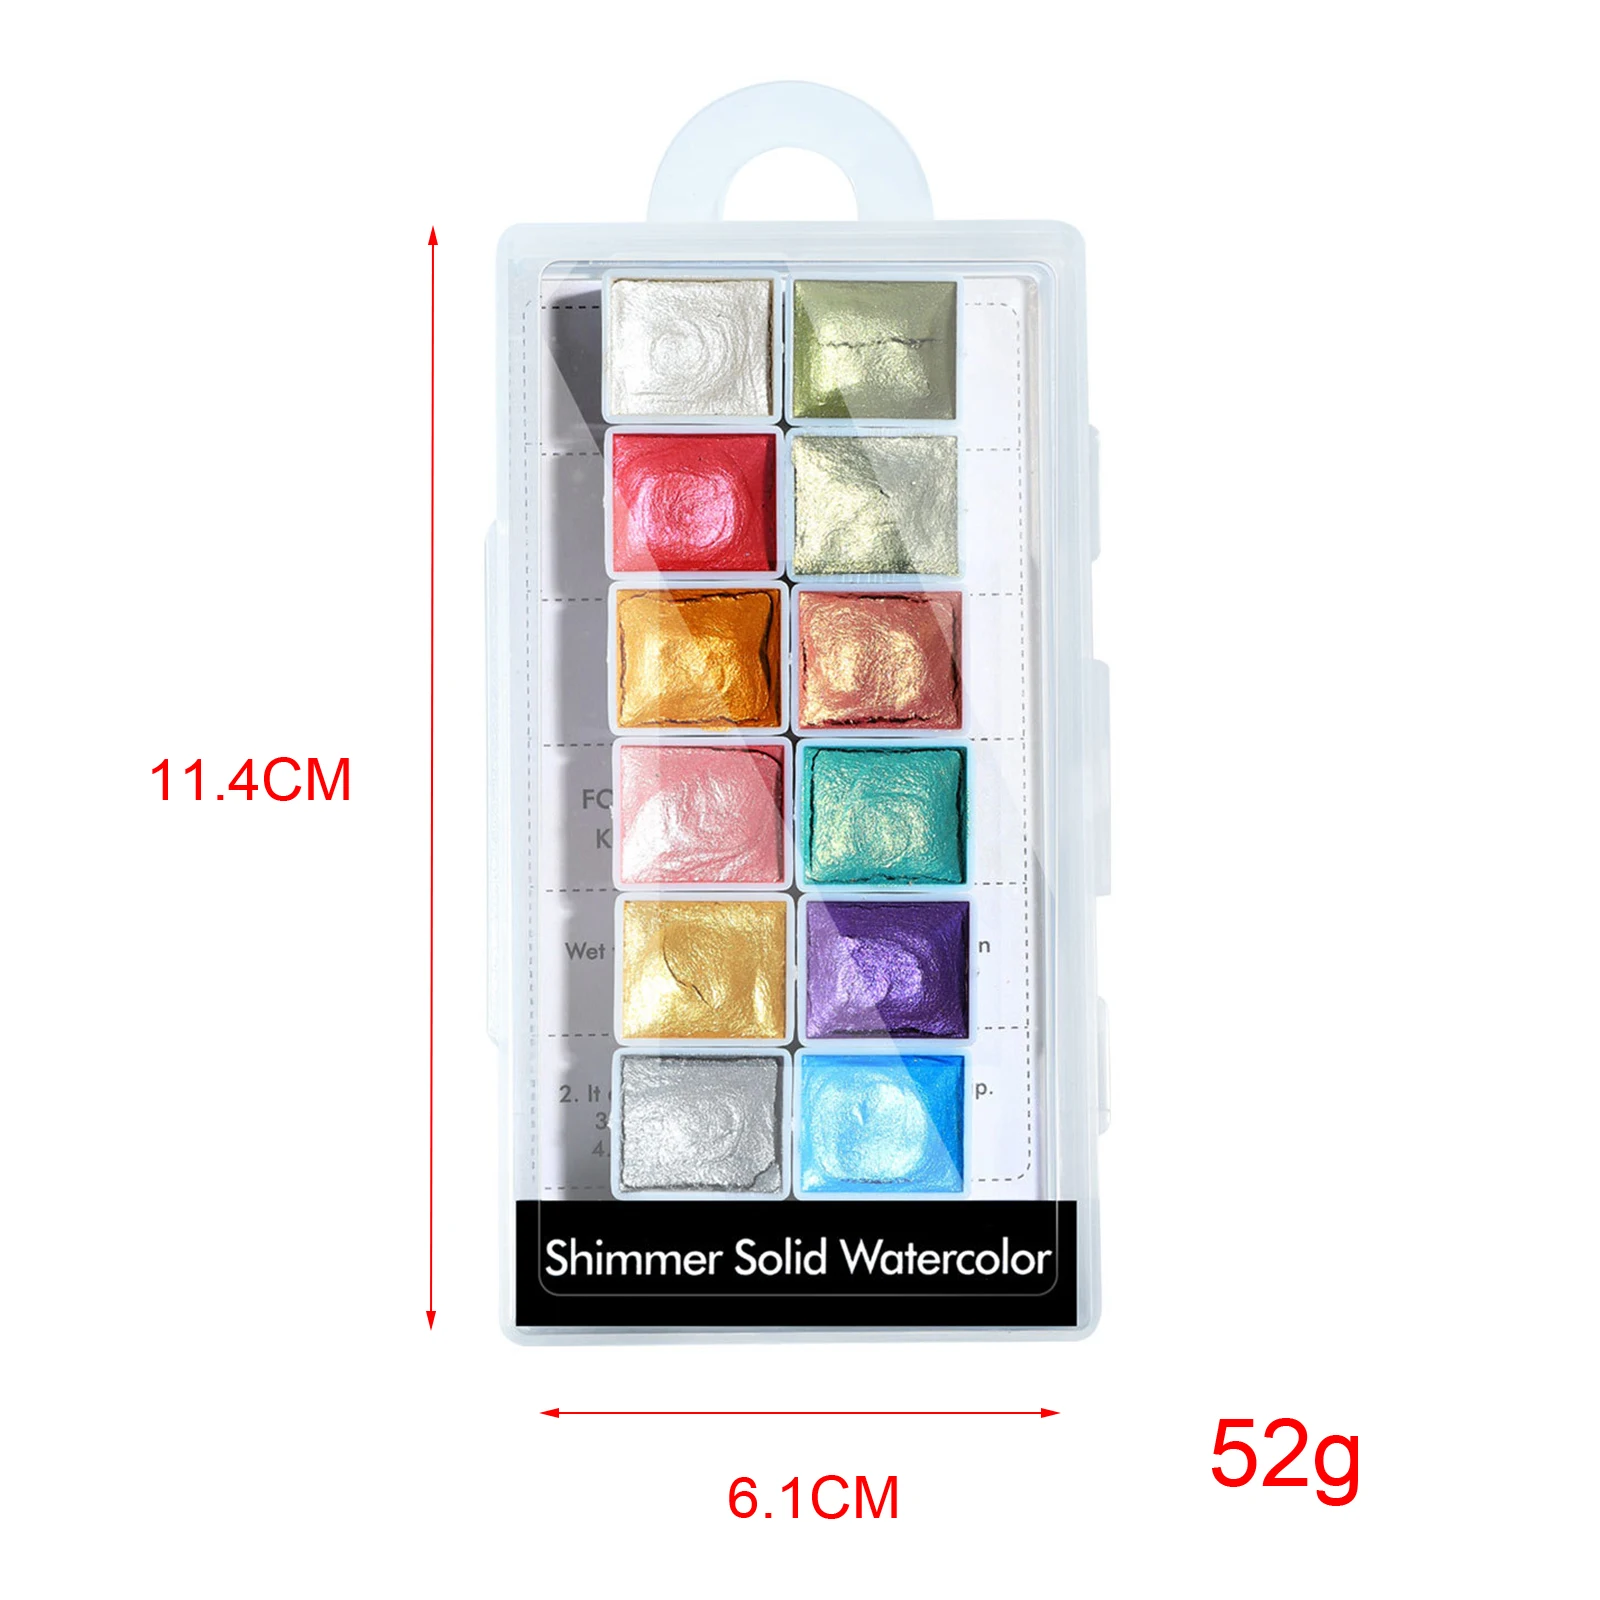 6 Colors Shimmer Solid Watercolor Palette DIY Nail Art for Artists Beginners Watercolor Powder Nail Art Pigment Manicure